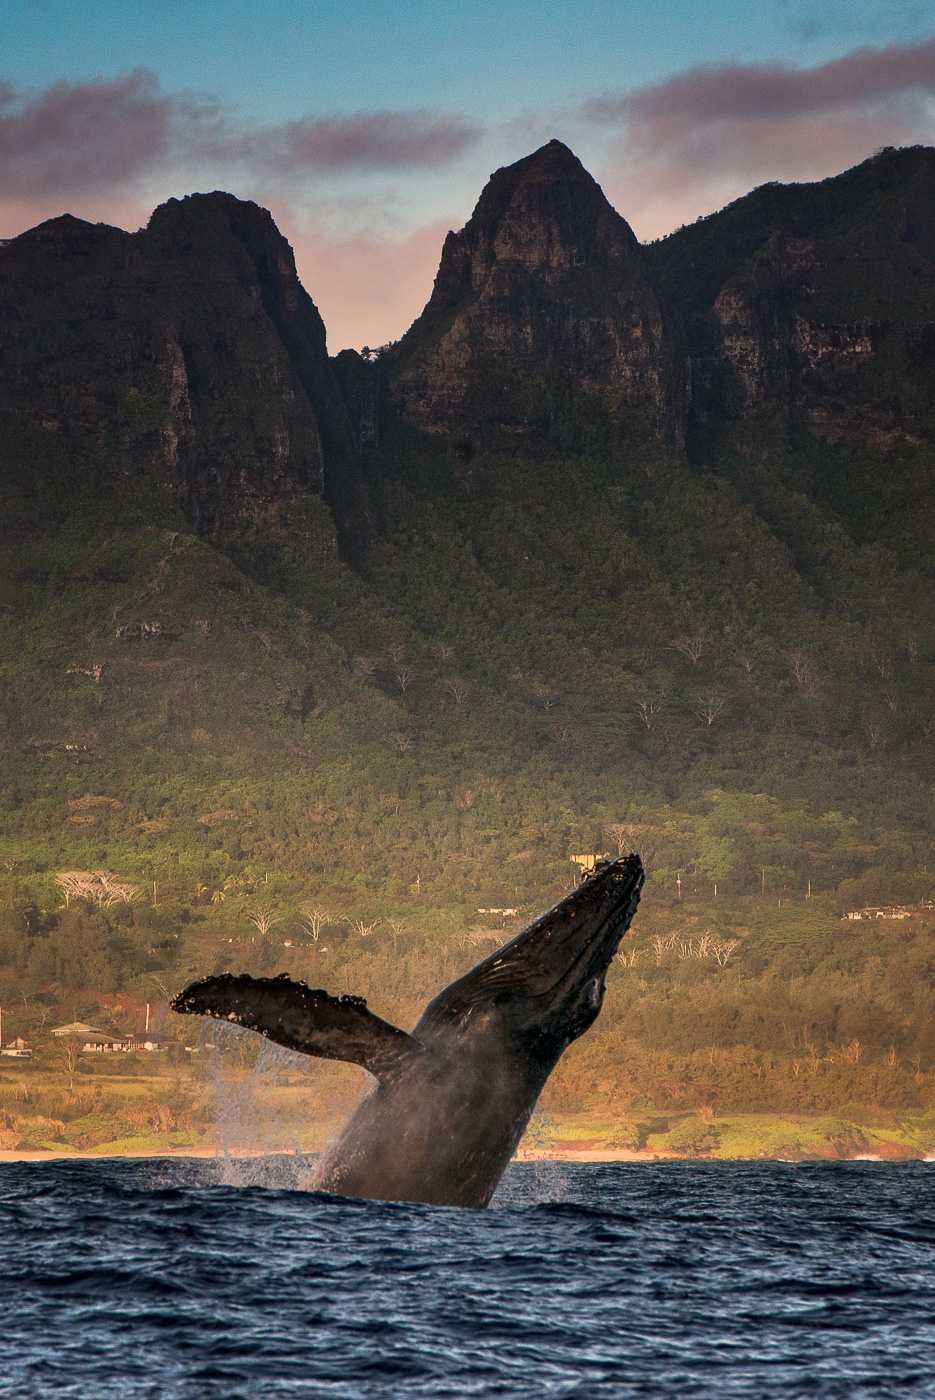 humpback whale breach with mountains in the background hawaii